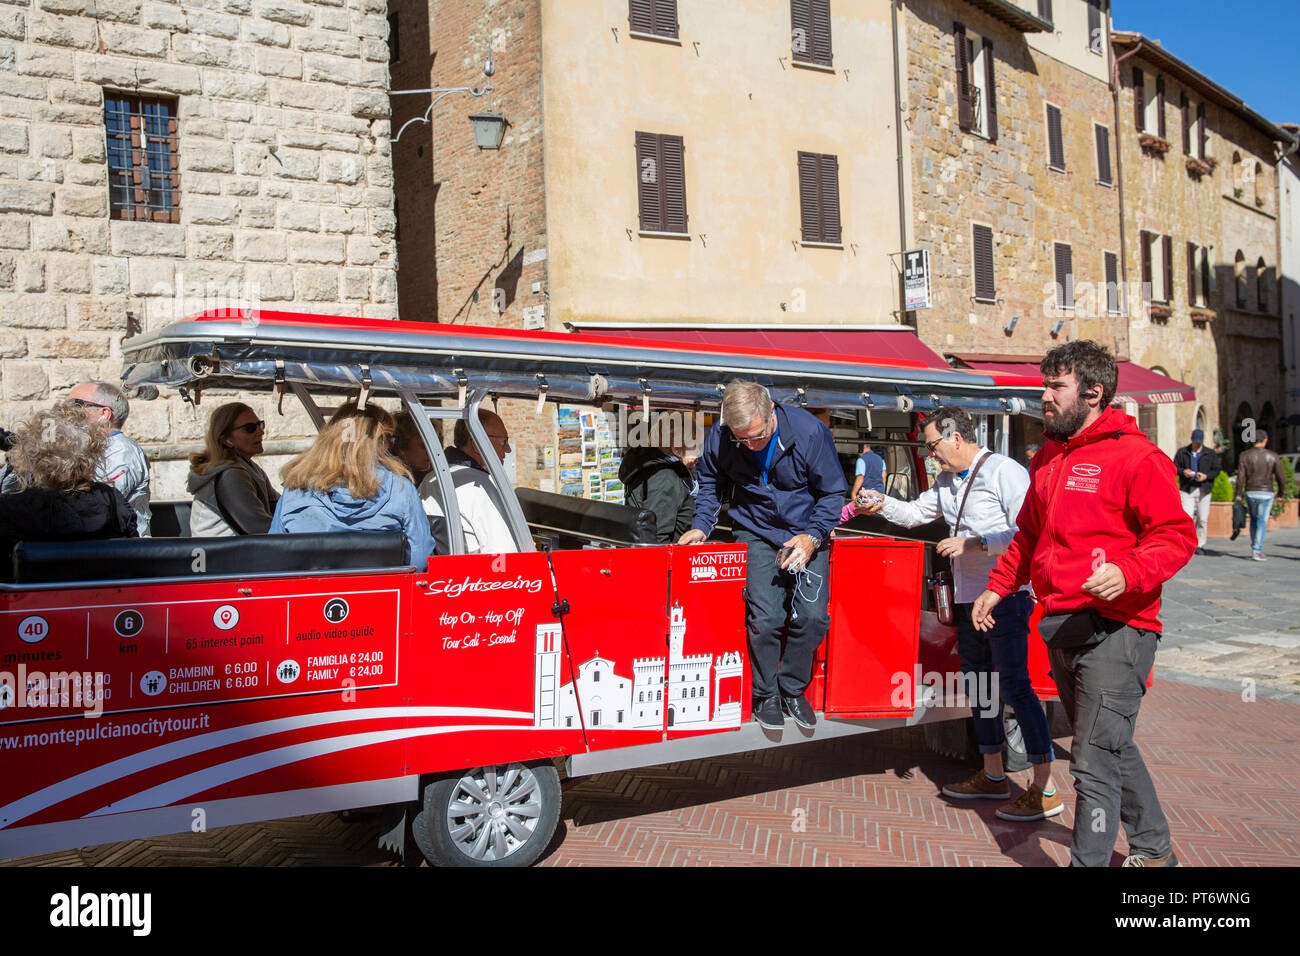 Tourists in Montepulciano an historic Italian hilltop town in Tuscany on a sightseeing tour bus of Montepulciano Stock Photo